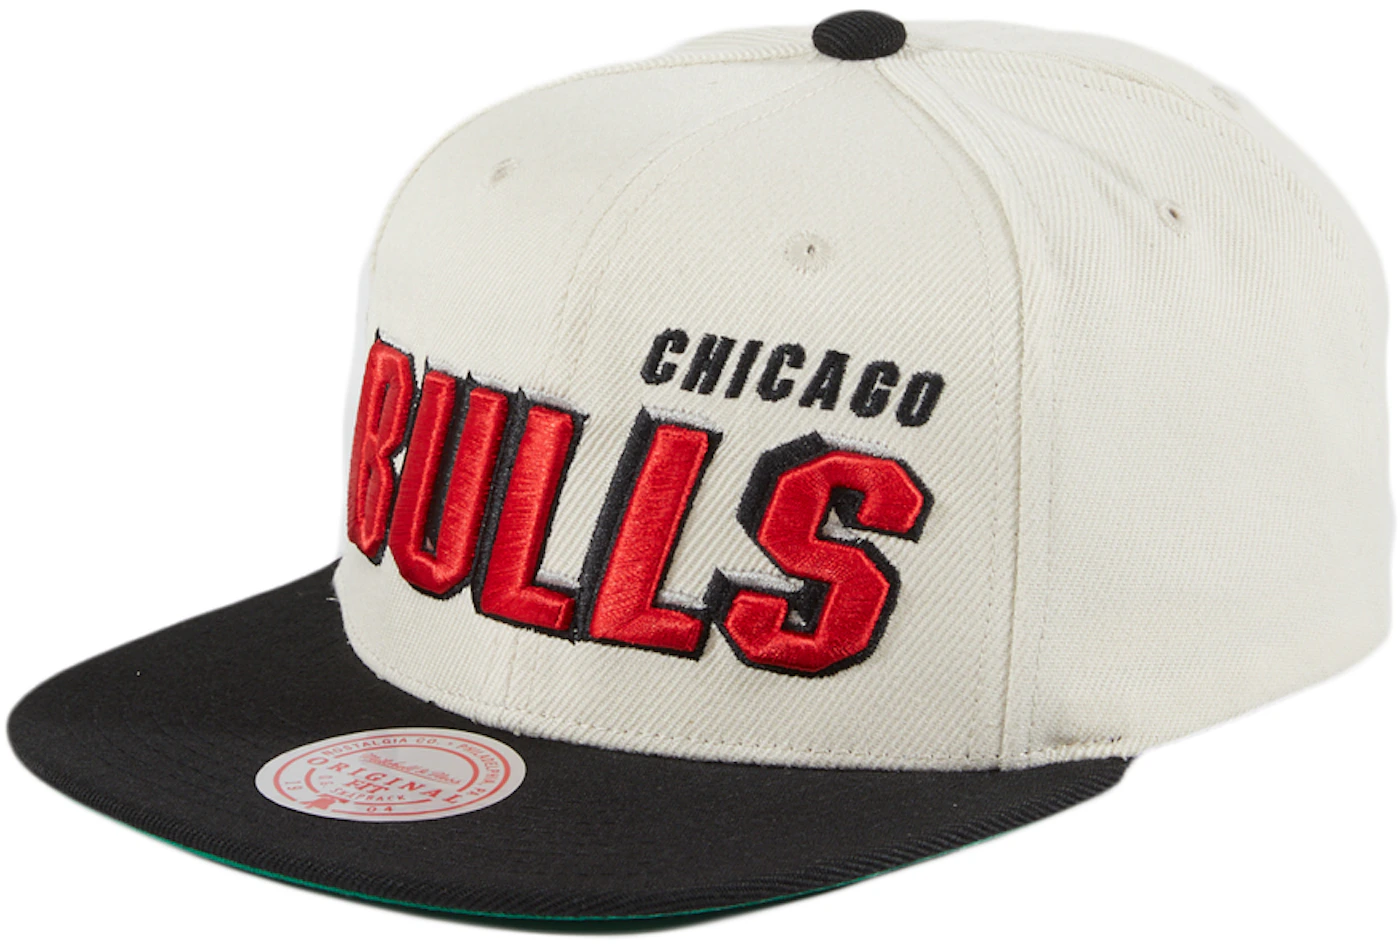 Logo Athletic, Accessories, Chicago Bulls 997 Championship Hat With Tags